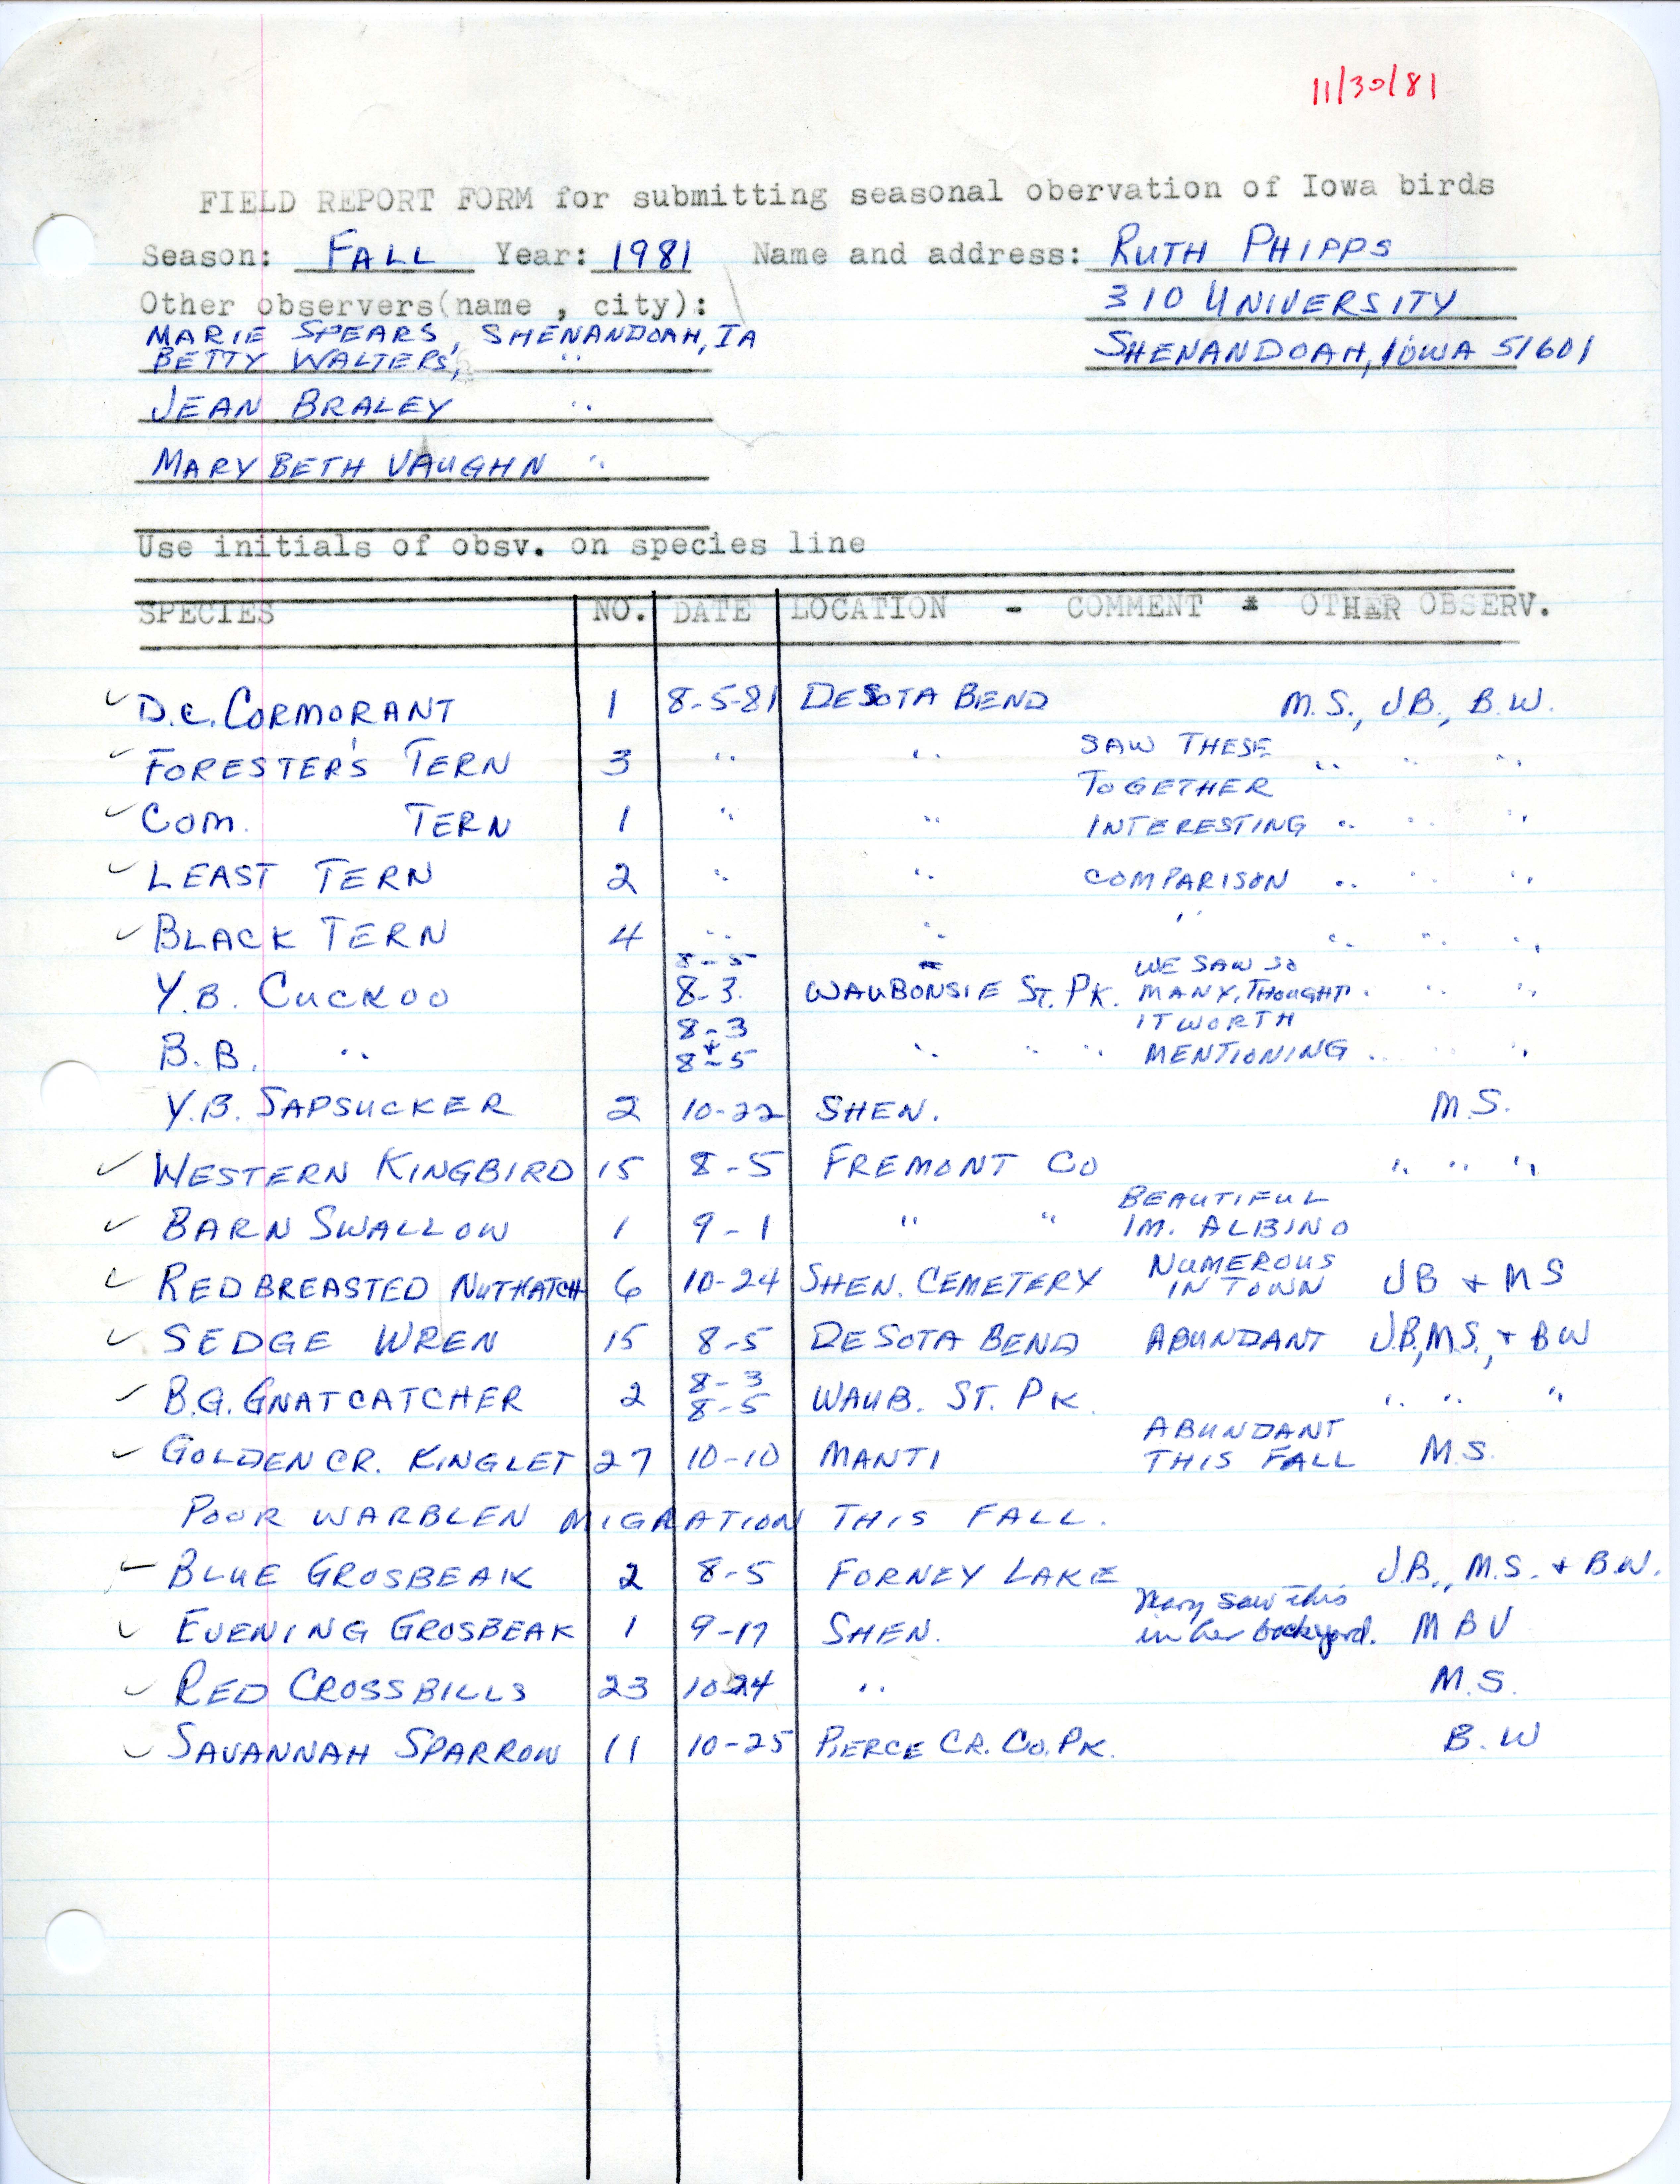 Field notes contributed by Ruth Phipps, November 30, 1981